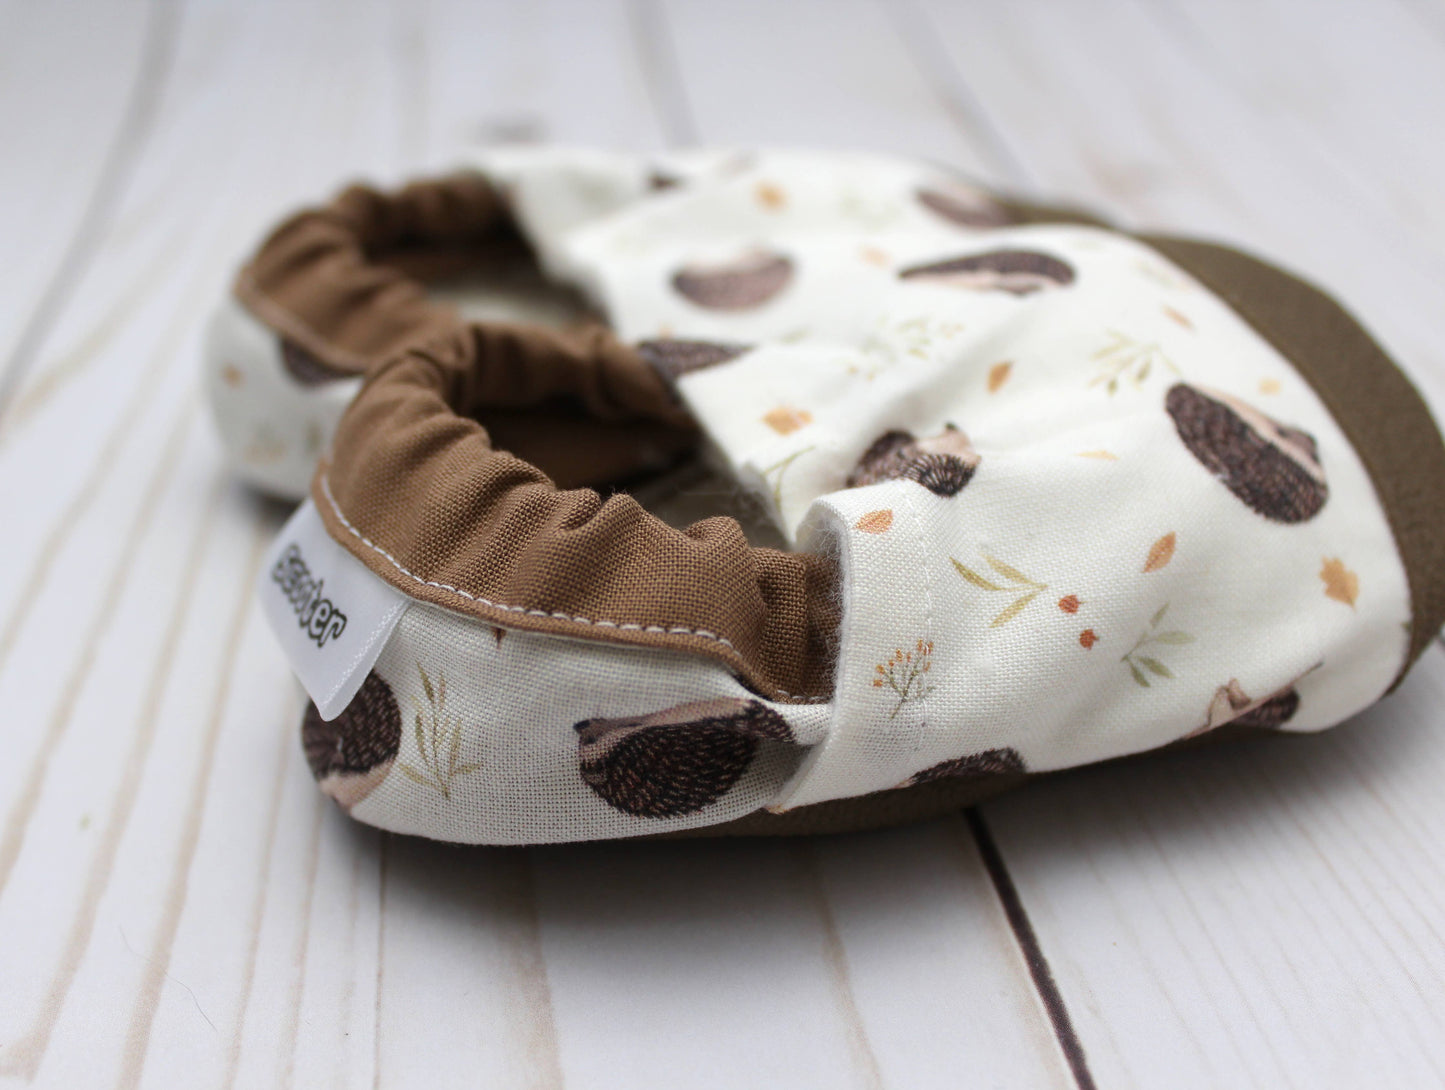 Scooter Booties - Hedgehogs Baby Shoes: 2 Toddler